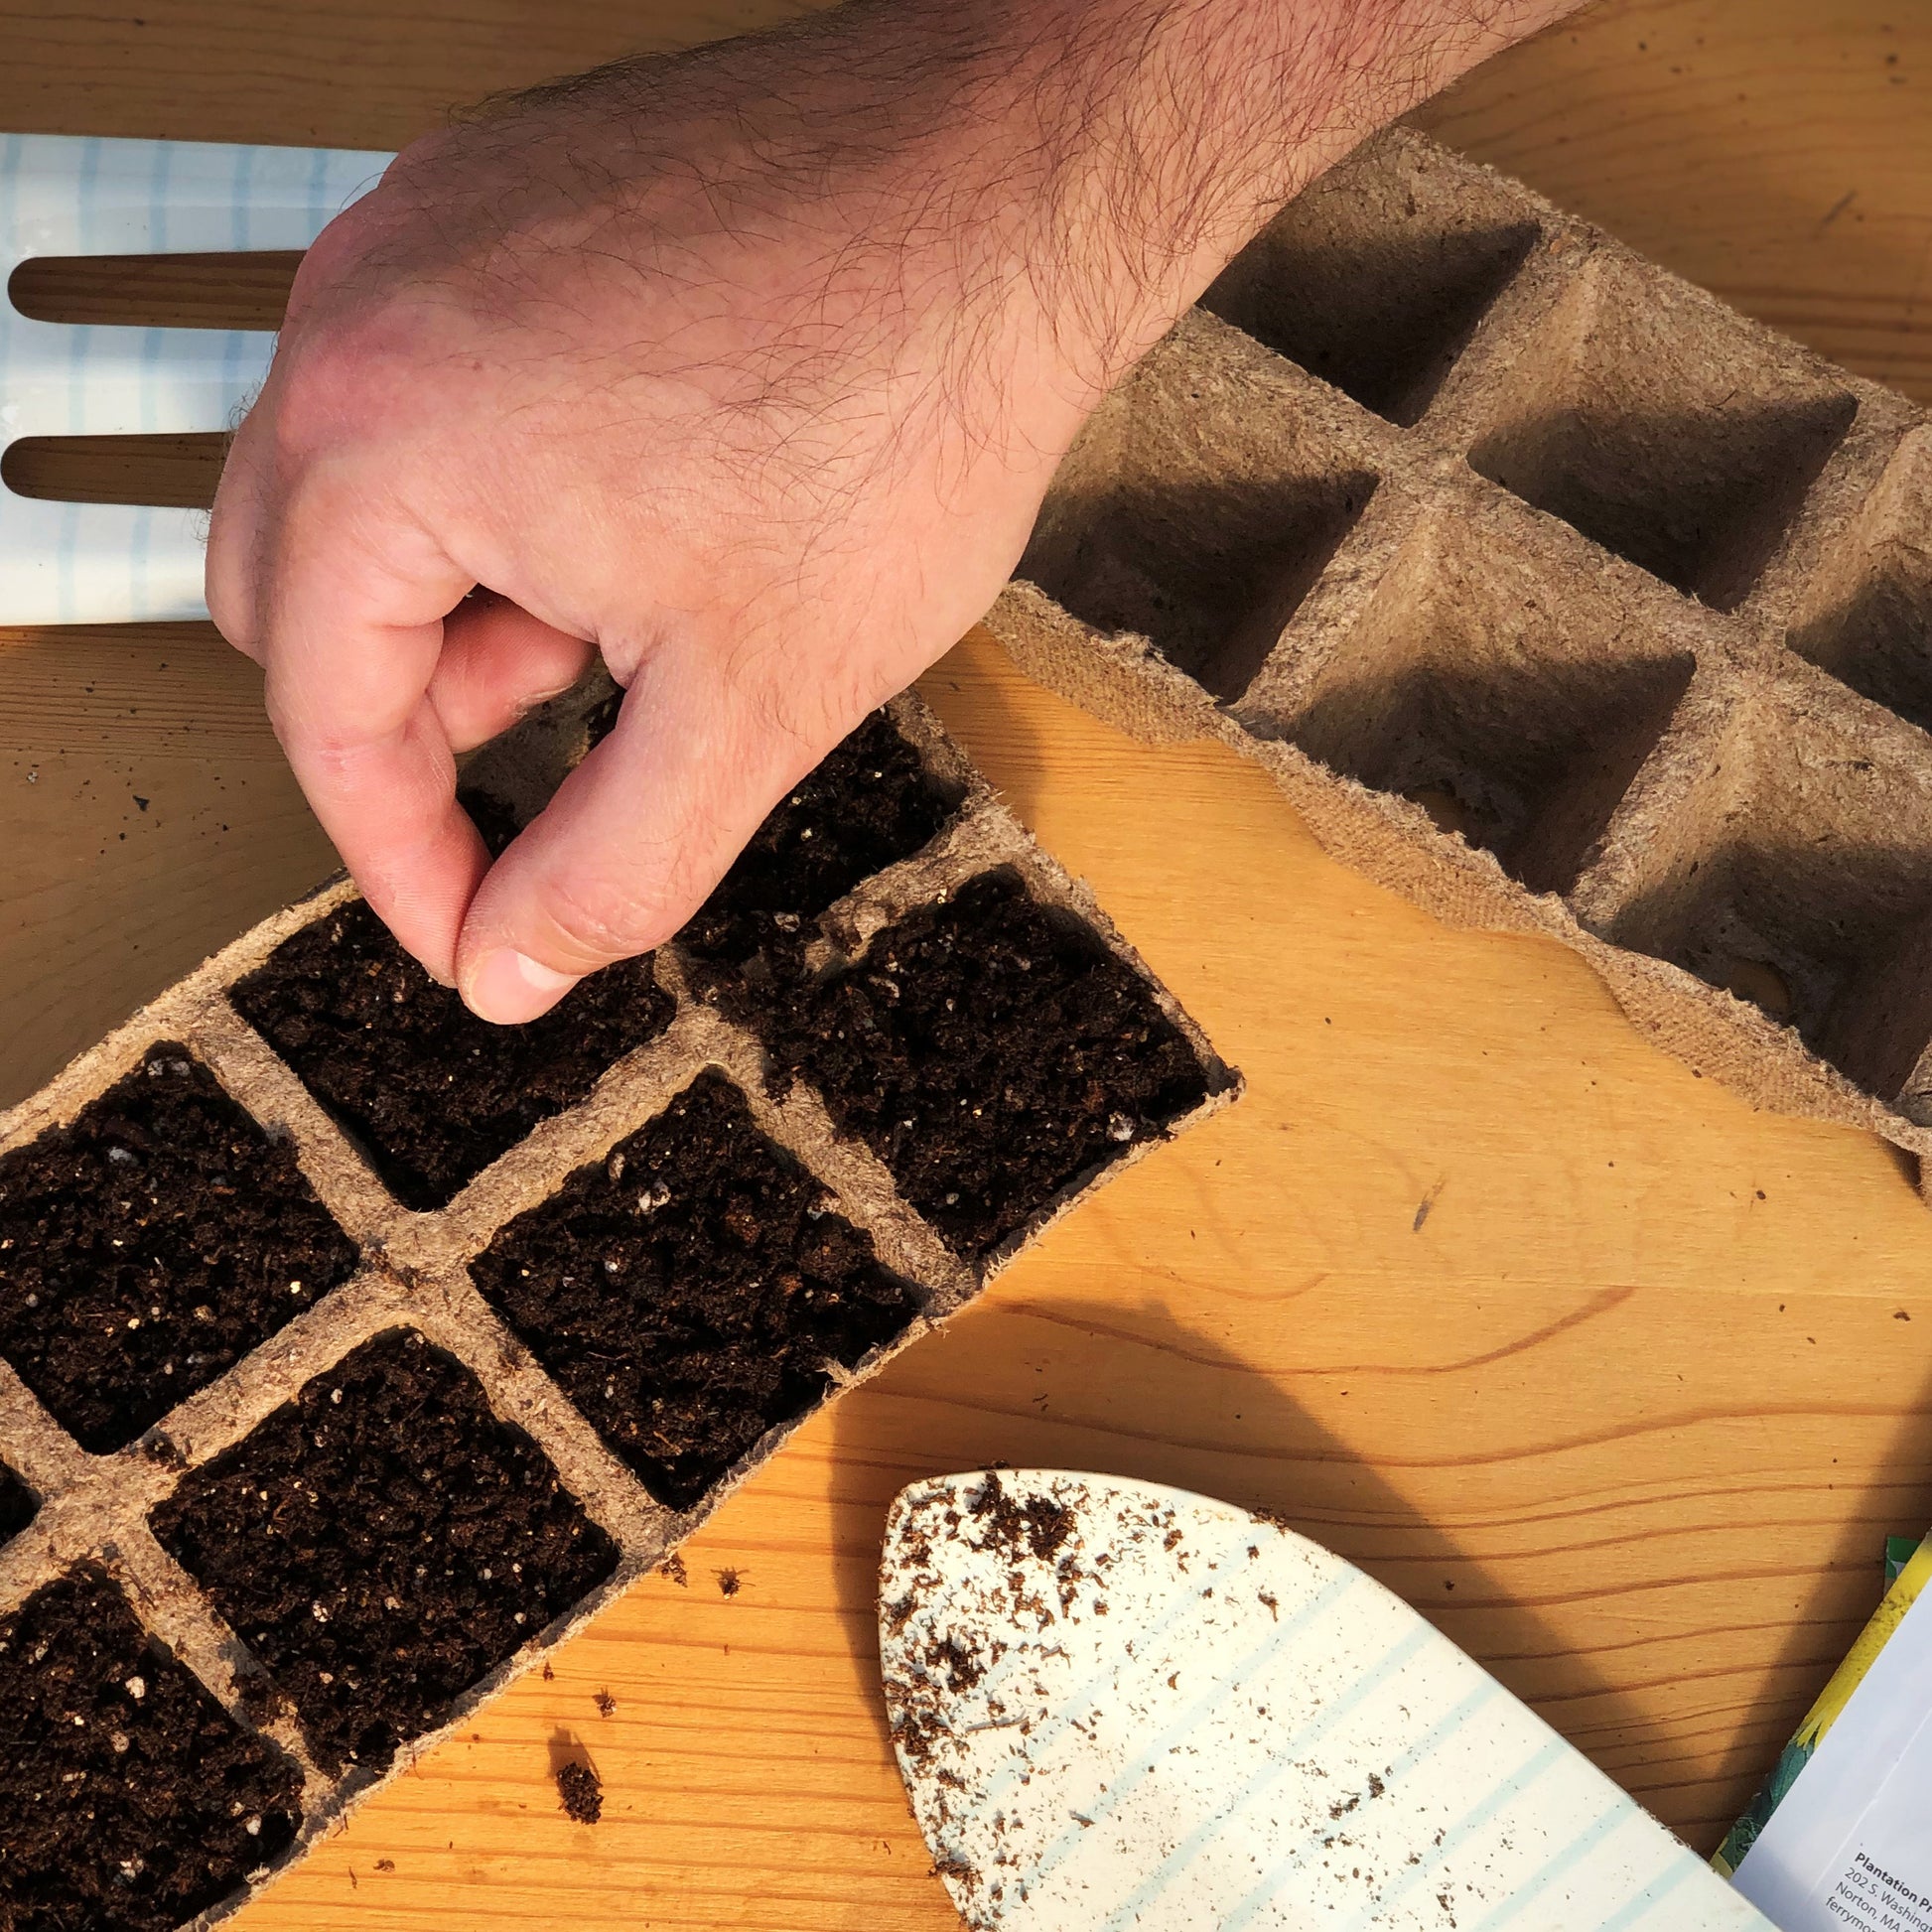 Starting Mild Jalapeno Pepper Seeds in Jiffy peat strip trays which easily tear apart when you are ready to transplant your pepper seedlings outdoors.